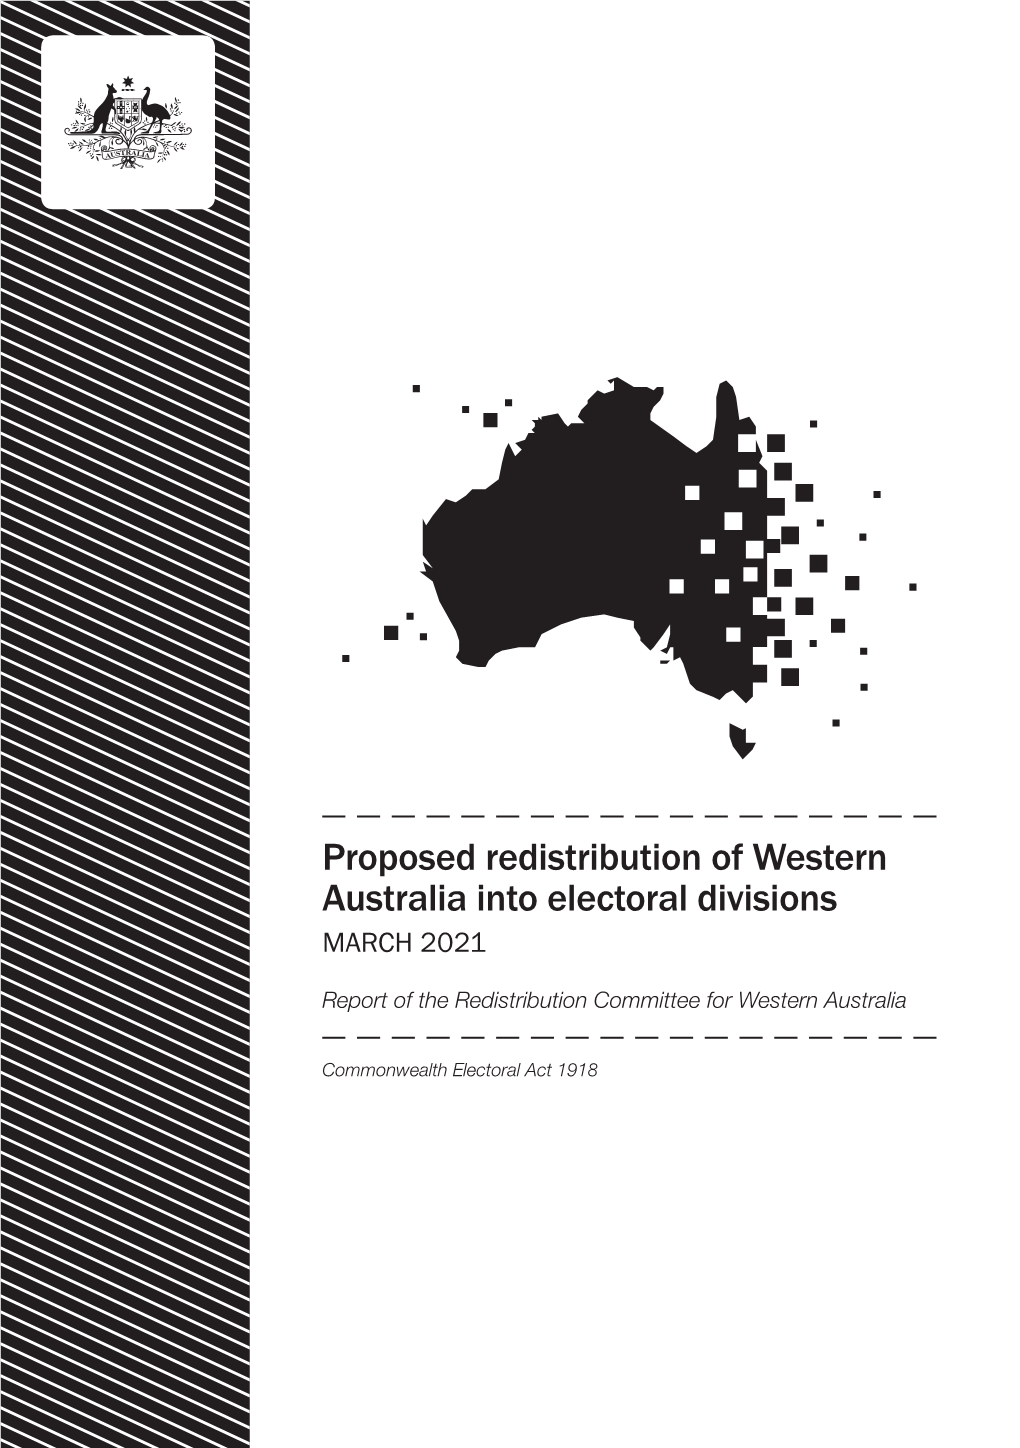 Proposed Redistribution of Western Australia Into Electoral Divisions MARCH 2021